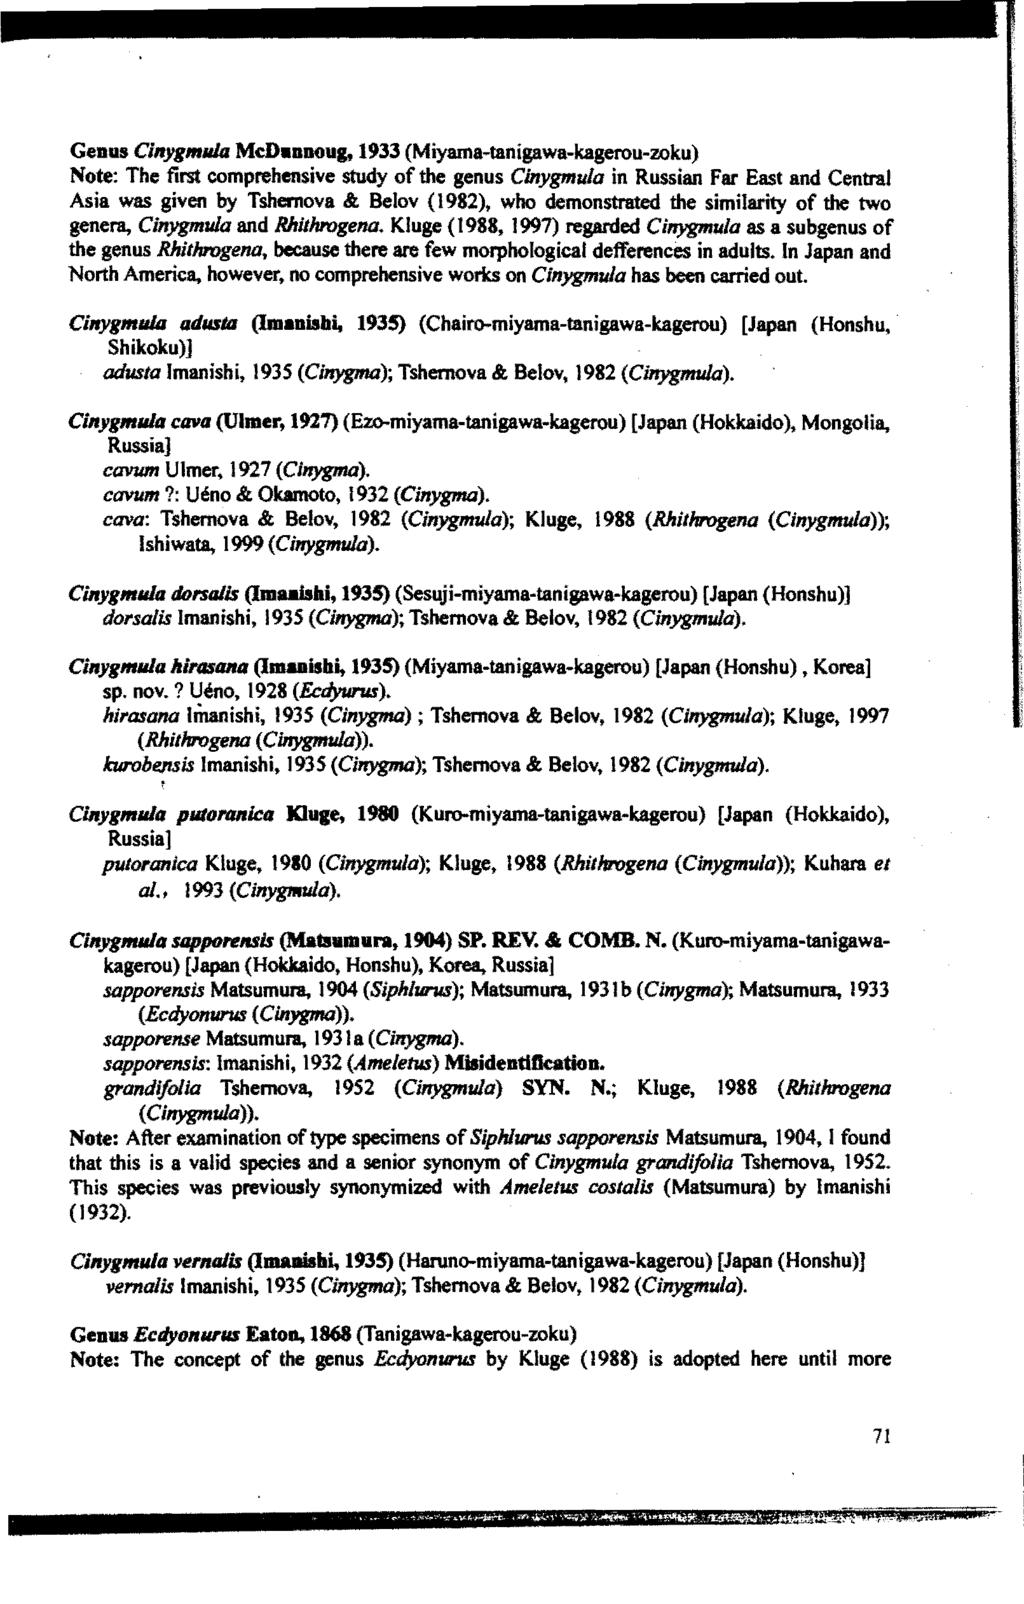 Genus Cinygmllla McDmnnoug, 1933 (Miyama-tanigawa-kagerou-zoku) Note: The first comprehensive study of the genus Cinygmula in Russian Far East and Central Asia was given by Tshernova & Belov ( 1982),